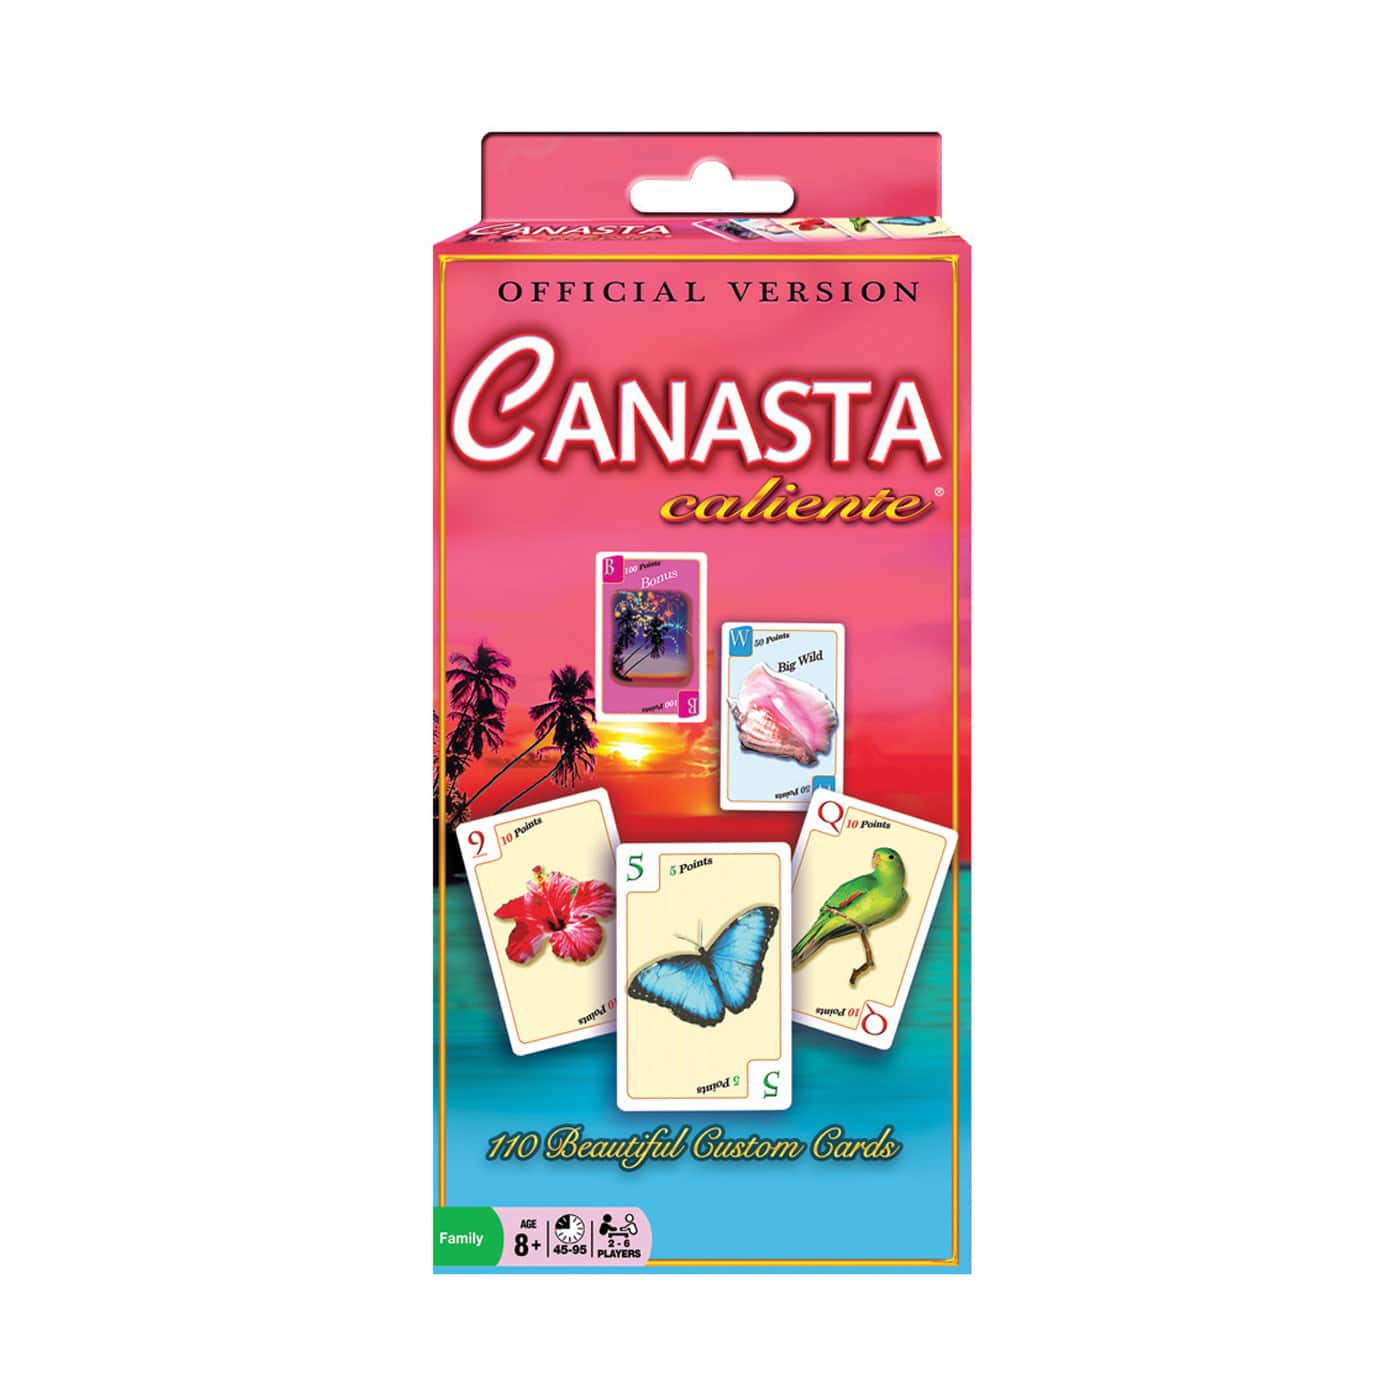 Deluxe Canasta Caliente Card Game Official Version 2003 Winning Moves USA for sale online 